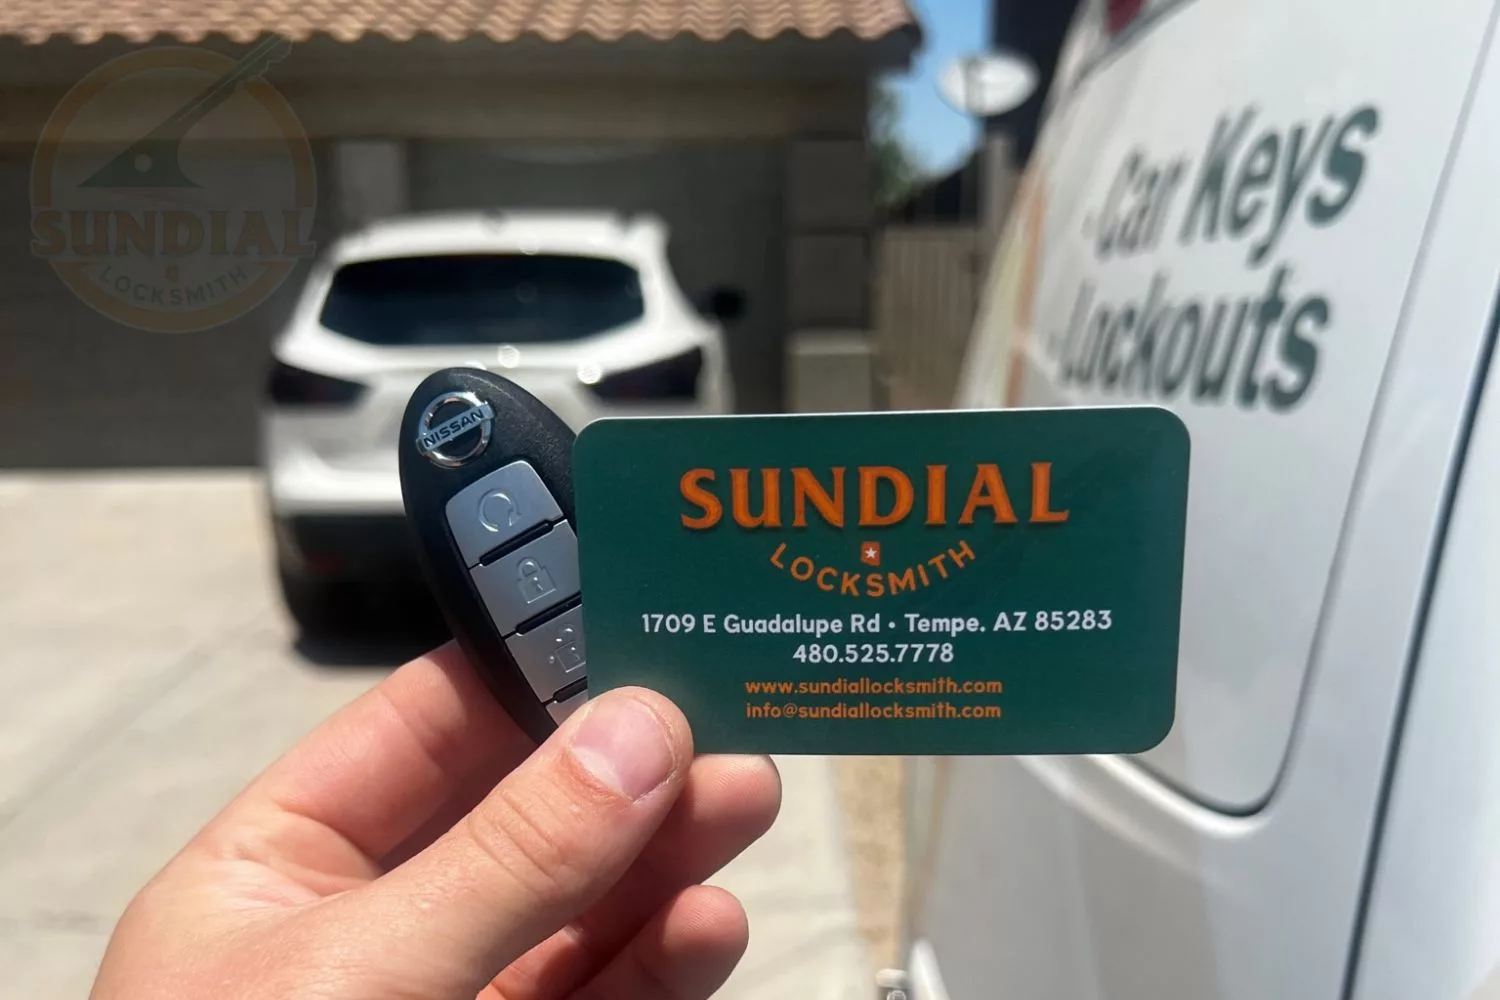 rom key cutting to programming, Sundial Locksmith in Phoenix offers a comprehensive suite of services to cater to every car key need.